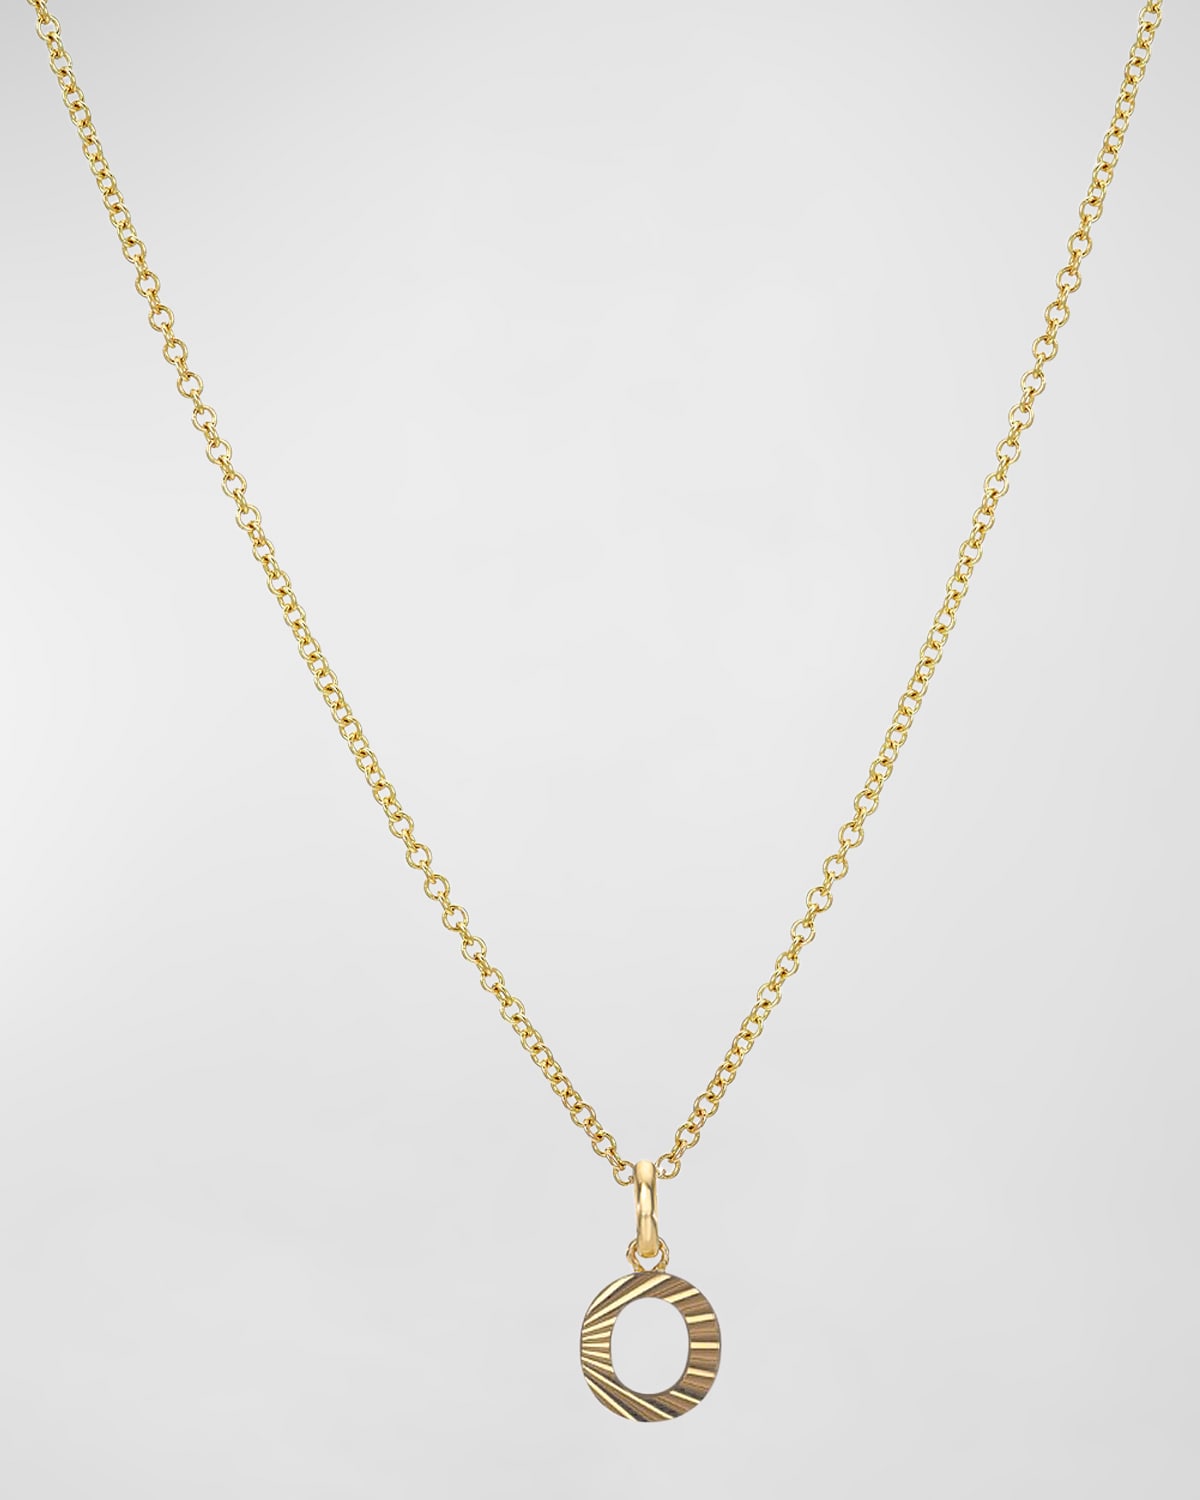 Zoe Lev Jewelry 14k Gold Initial Pendant Necklace In O